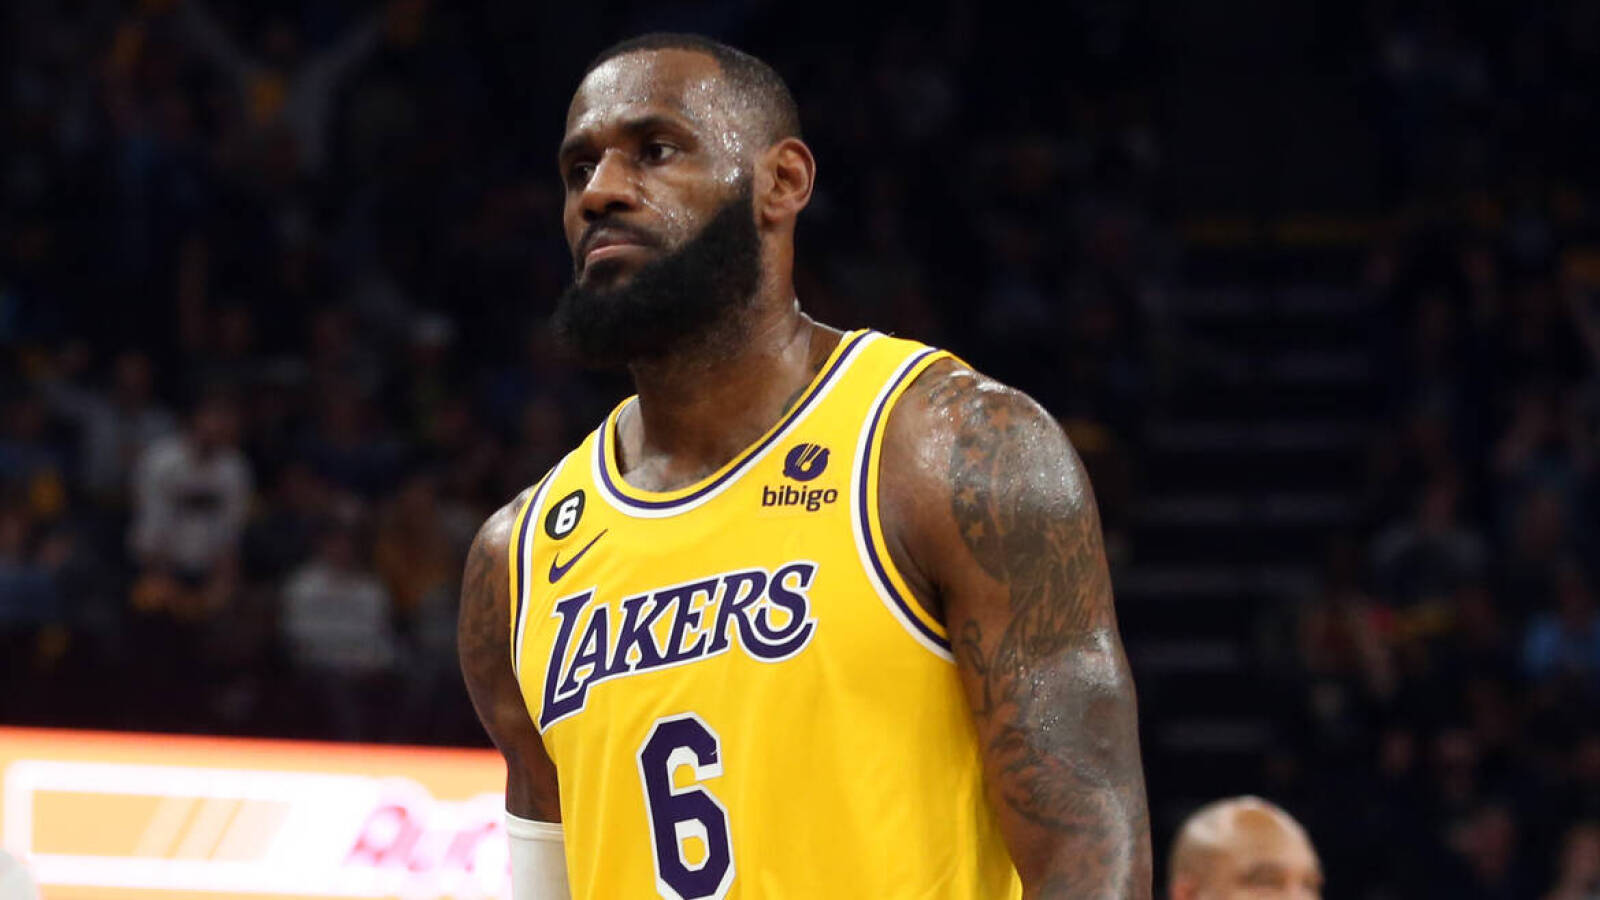 Lakers' LeBron James dismisses trash talk from Grizzlies' Dillon Brooks:  'I'm ready to play' - The Athletic